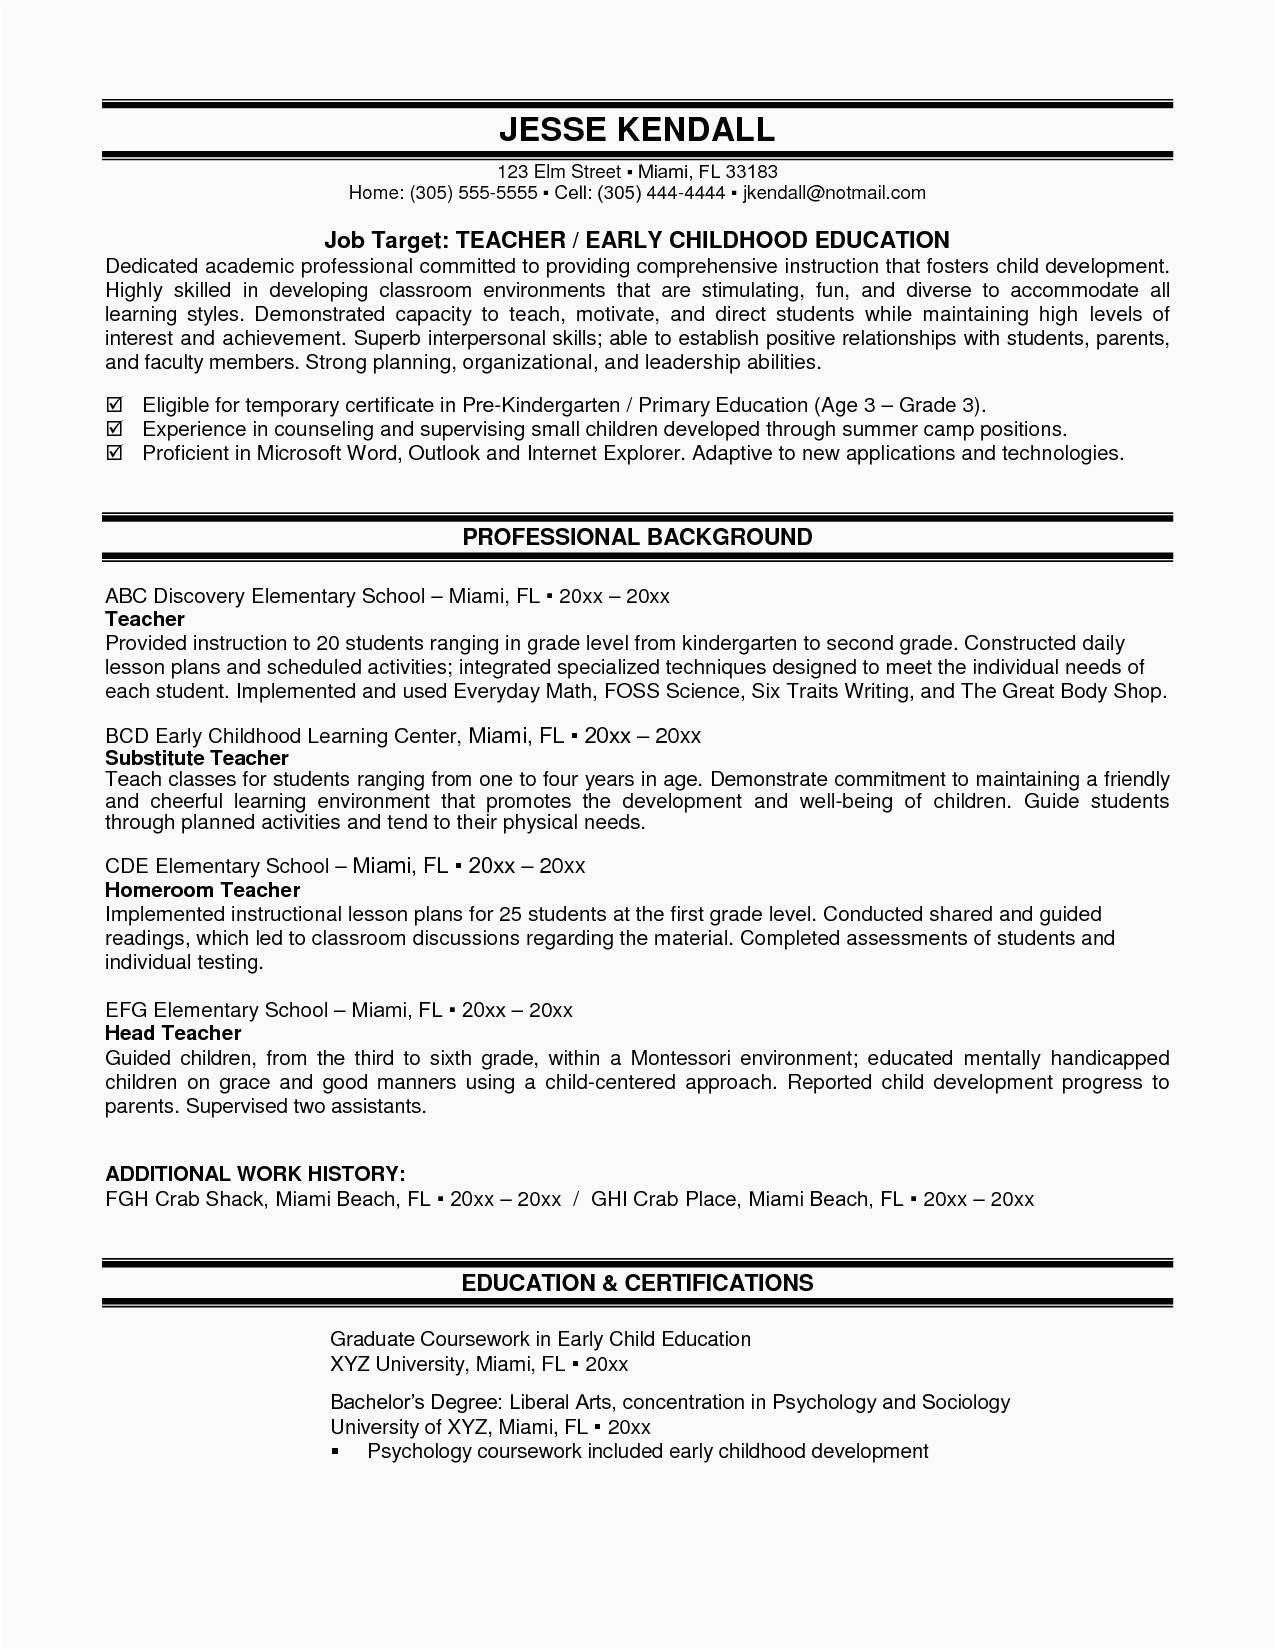 Free Resume Templates with Bullet Points 12 Bullet Point Resume Examples